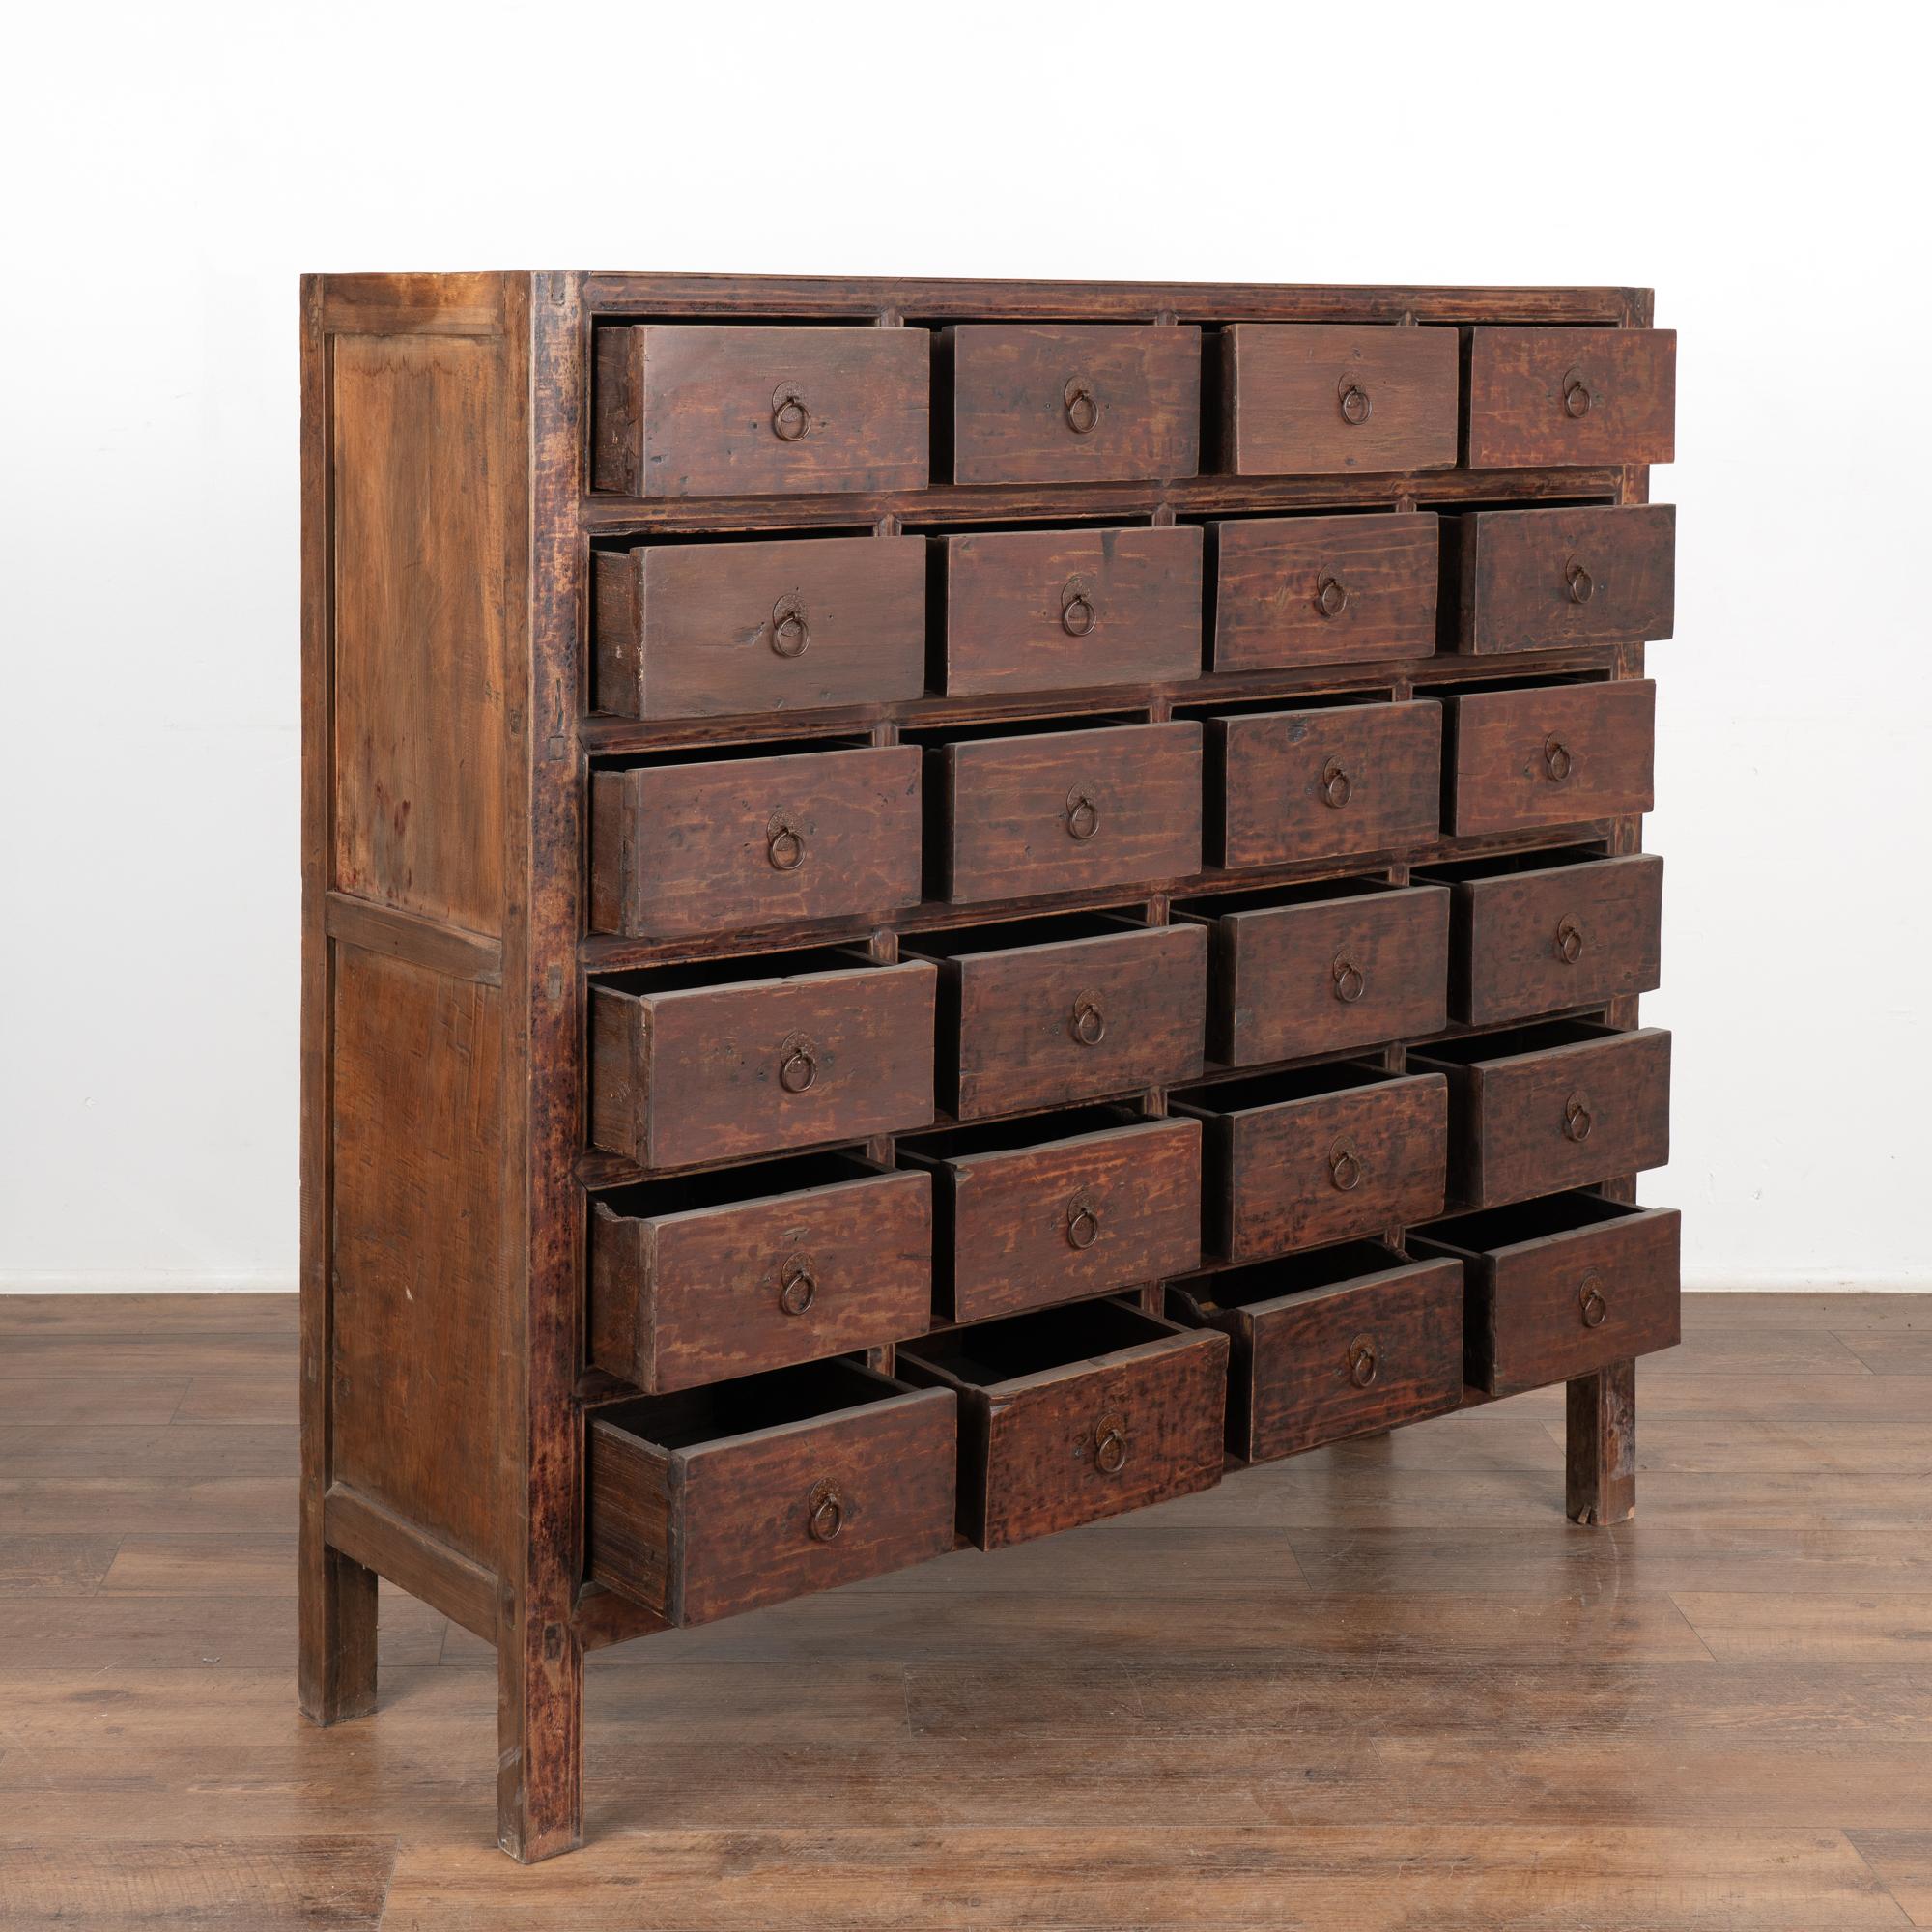 Chinese Export Chinese Apothecary Chest of 24 Drawers, circa 1820-40 For Sale